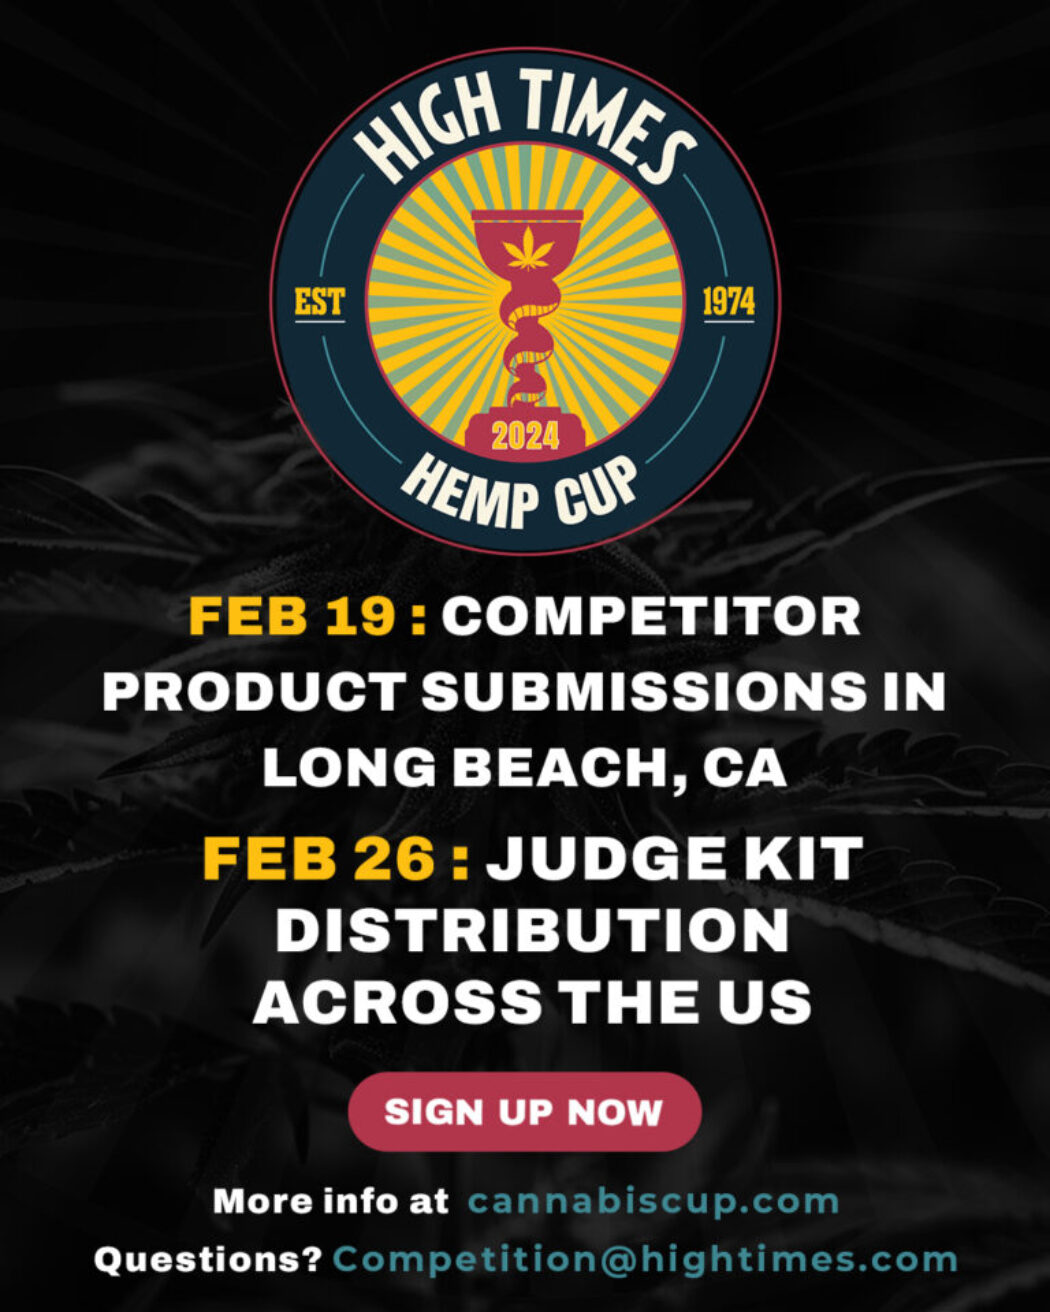 Announcing The High Times Hemp Cup: People’s Choice Edition 2024